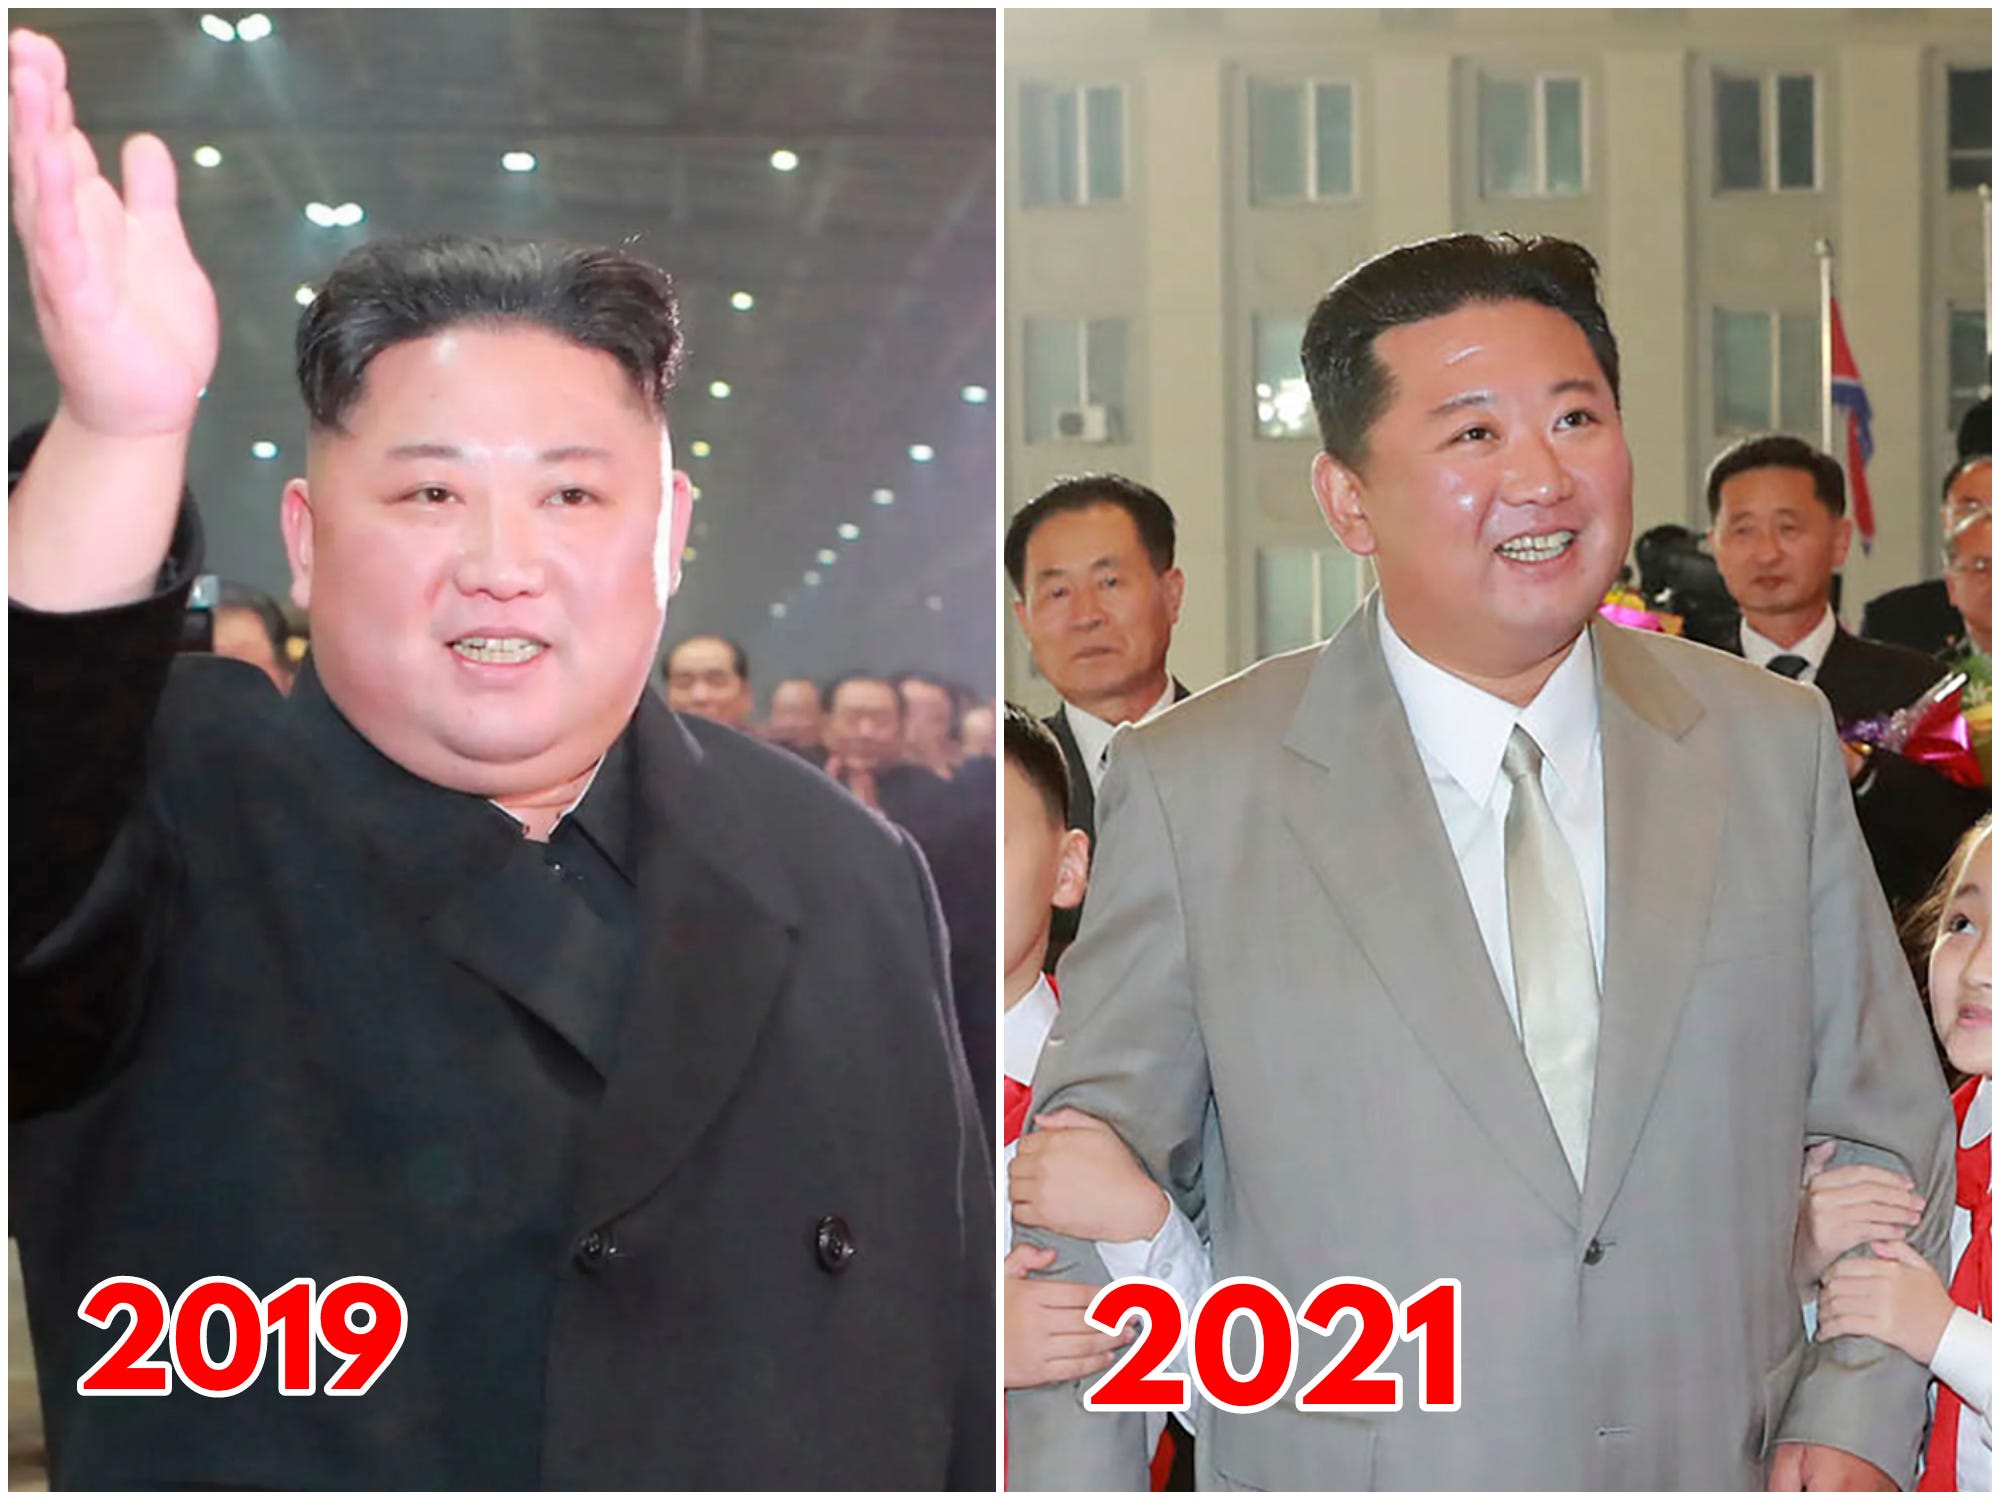 A collage of two images of Kim Jong Un in 2019 (left) and 2021 (right), both viewed from the front. He looks markedly slimmer in 2021.